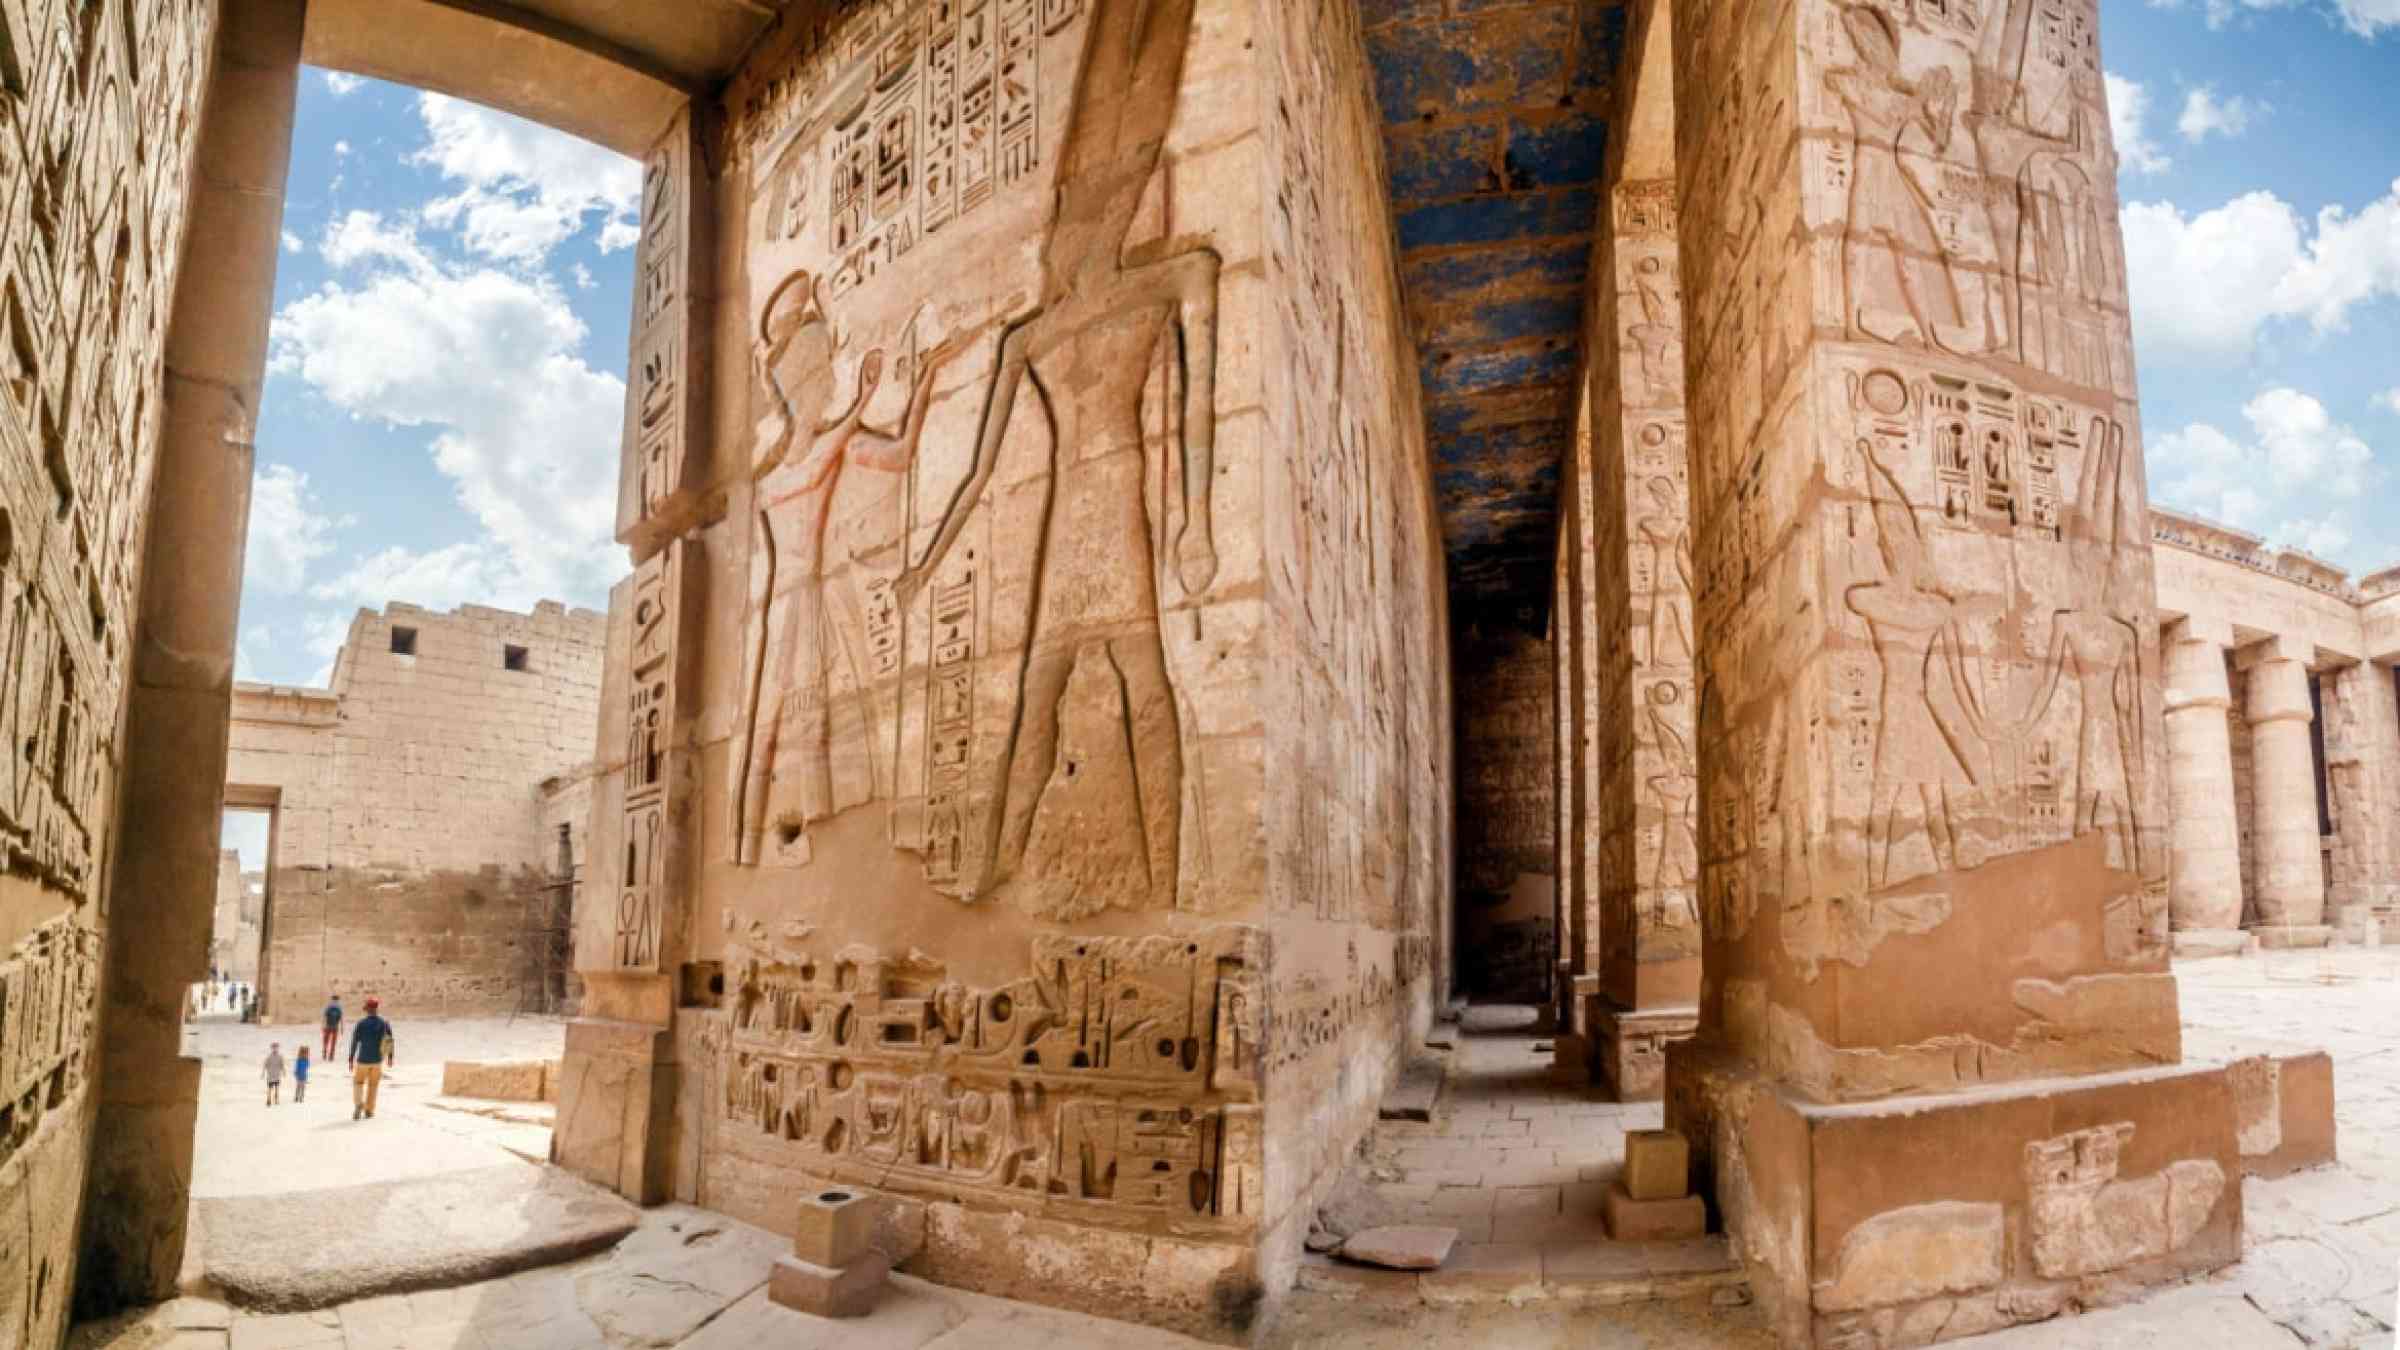 Temple of Medinet Habu. Egypt, Luxor. The Mortuary Temple of Ramesses III at Medinet Habu is an important New Kingdom period structure in the West Bank of Luxor in Egypt